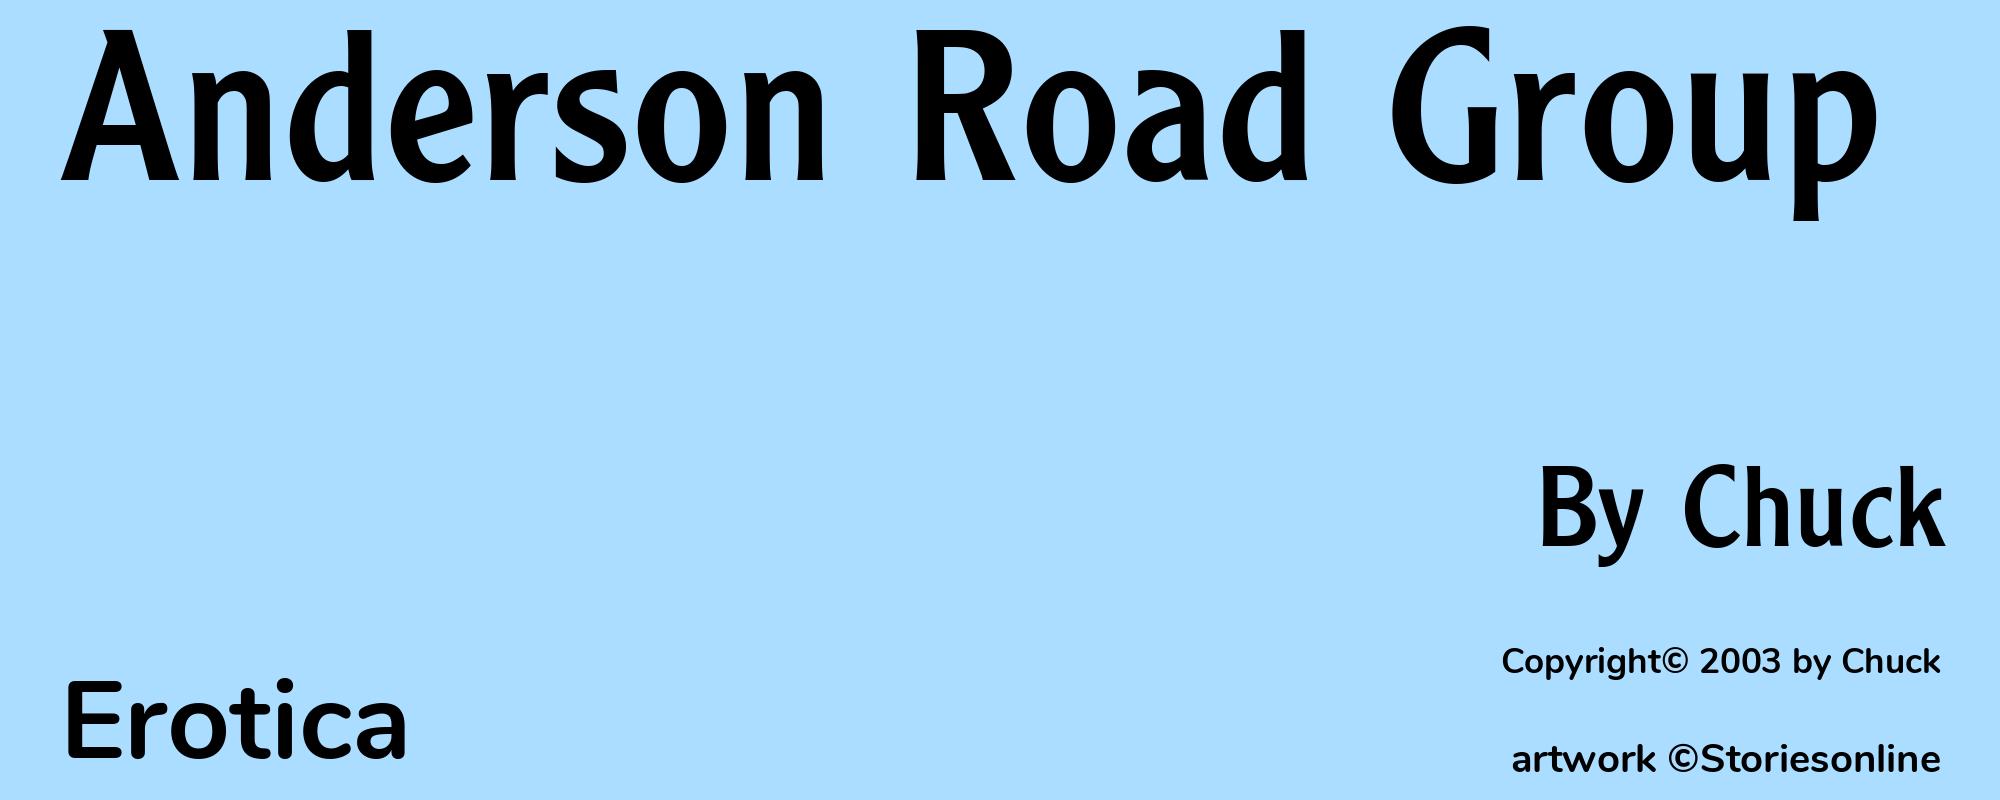 Anderson Road Group - Cover